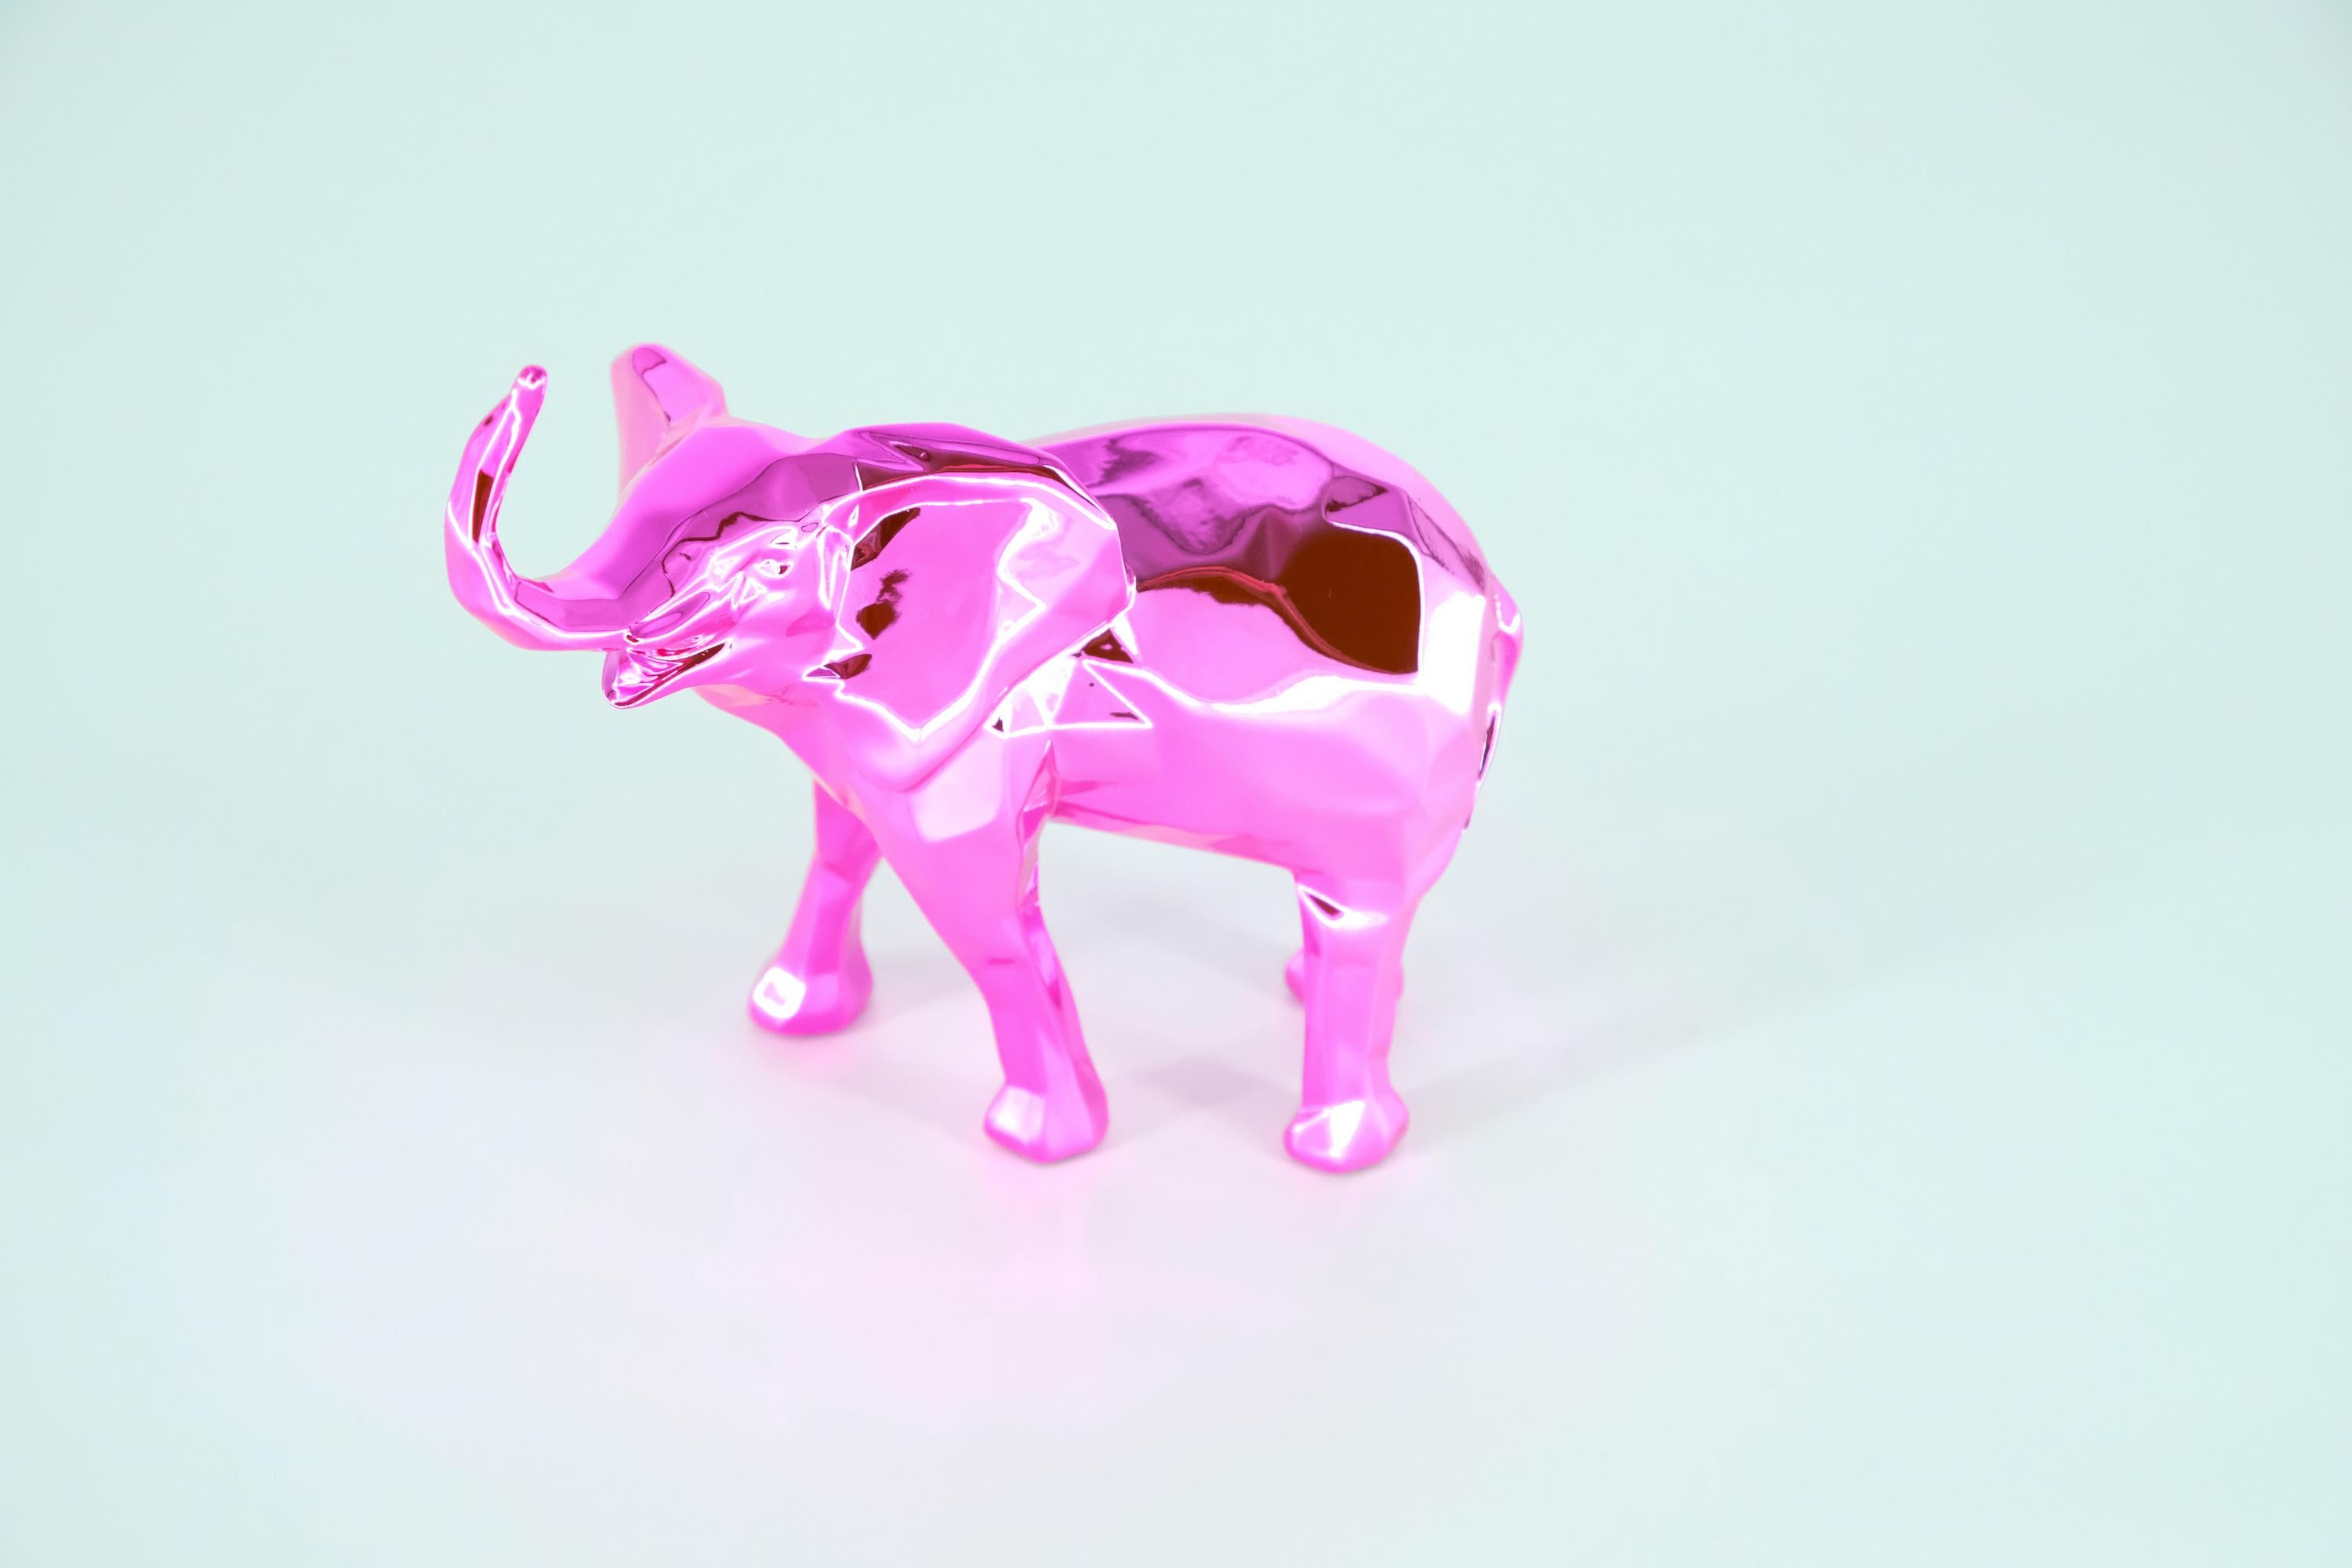 Elephant Spirit  (Pink Edition) - Sculpture in original box with artist coa For Sale 1